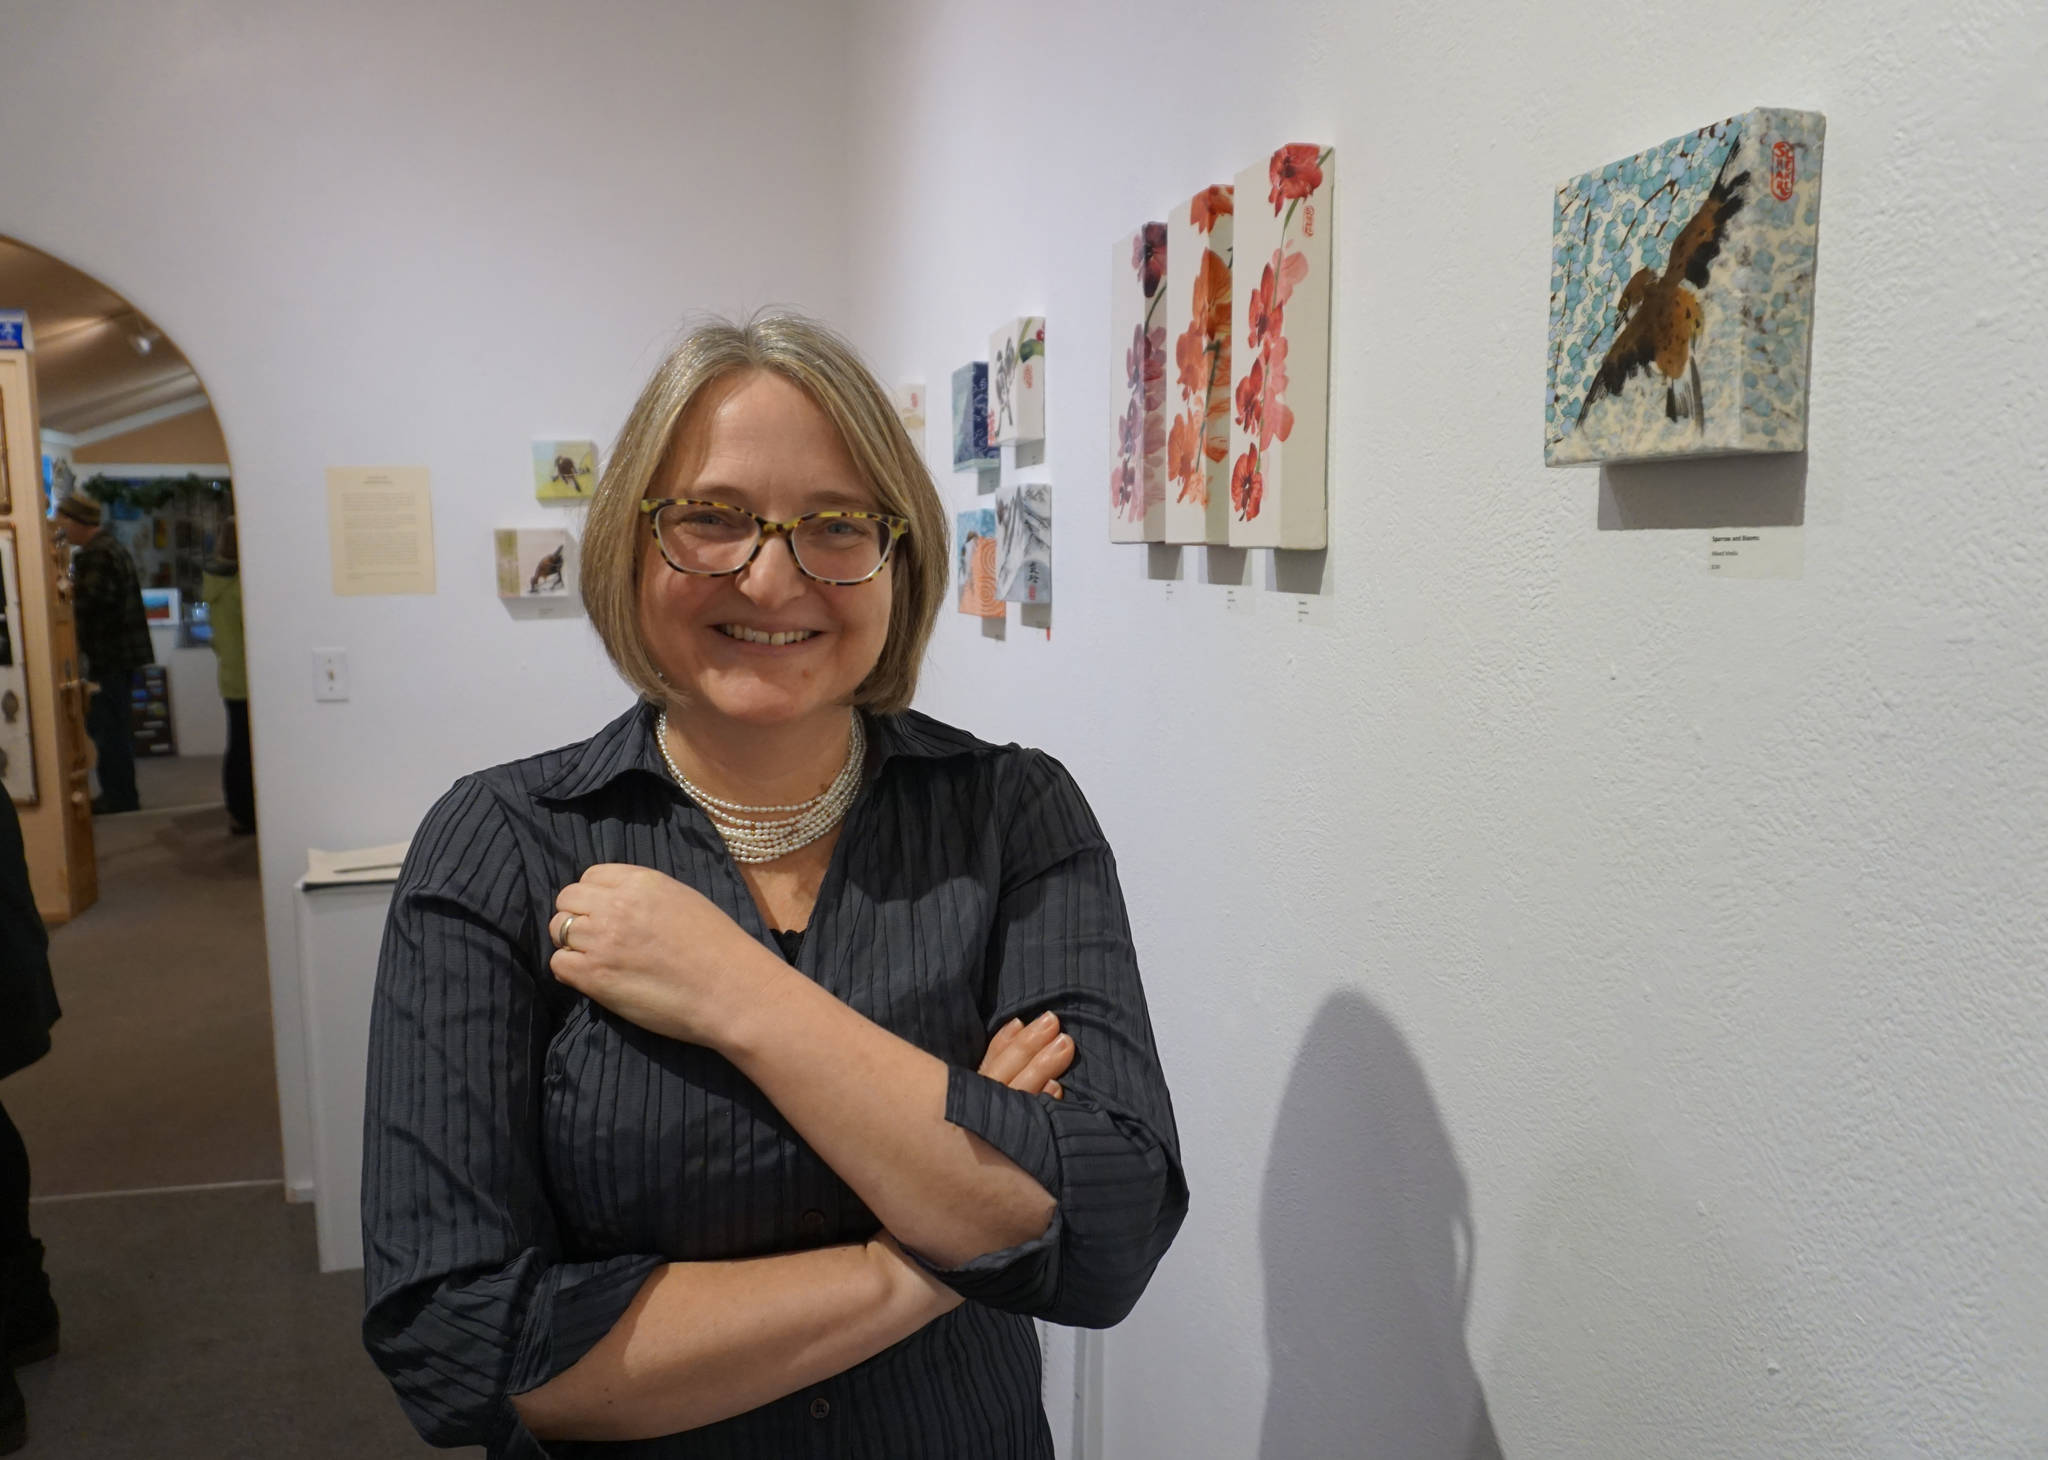 Sharlene Cline greets visitors at her First Friday opening on Friday, Dec. 1, 2017, at her show of collages using Chinese brush painting and other media at Ptarmingan Arts in Homer, Alaska. (Photo by Michael Armstrong, Homer News)